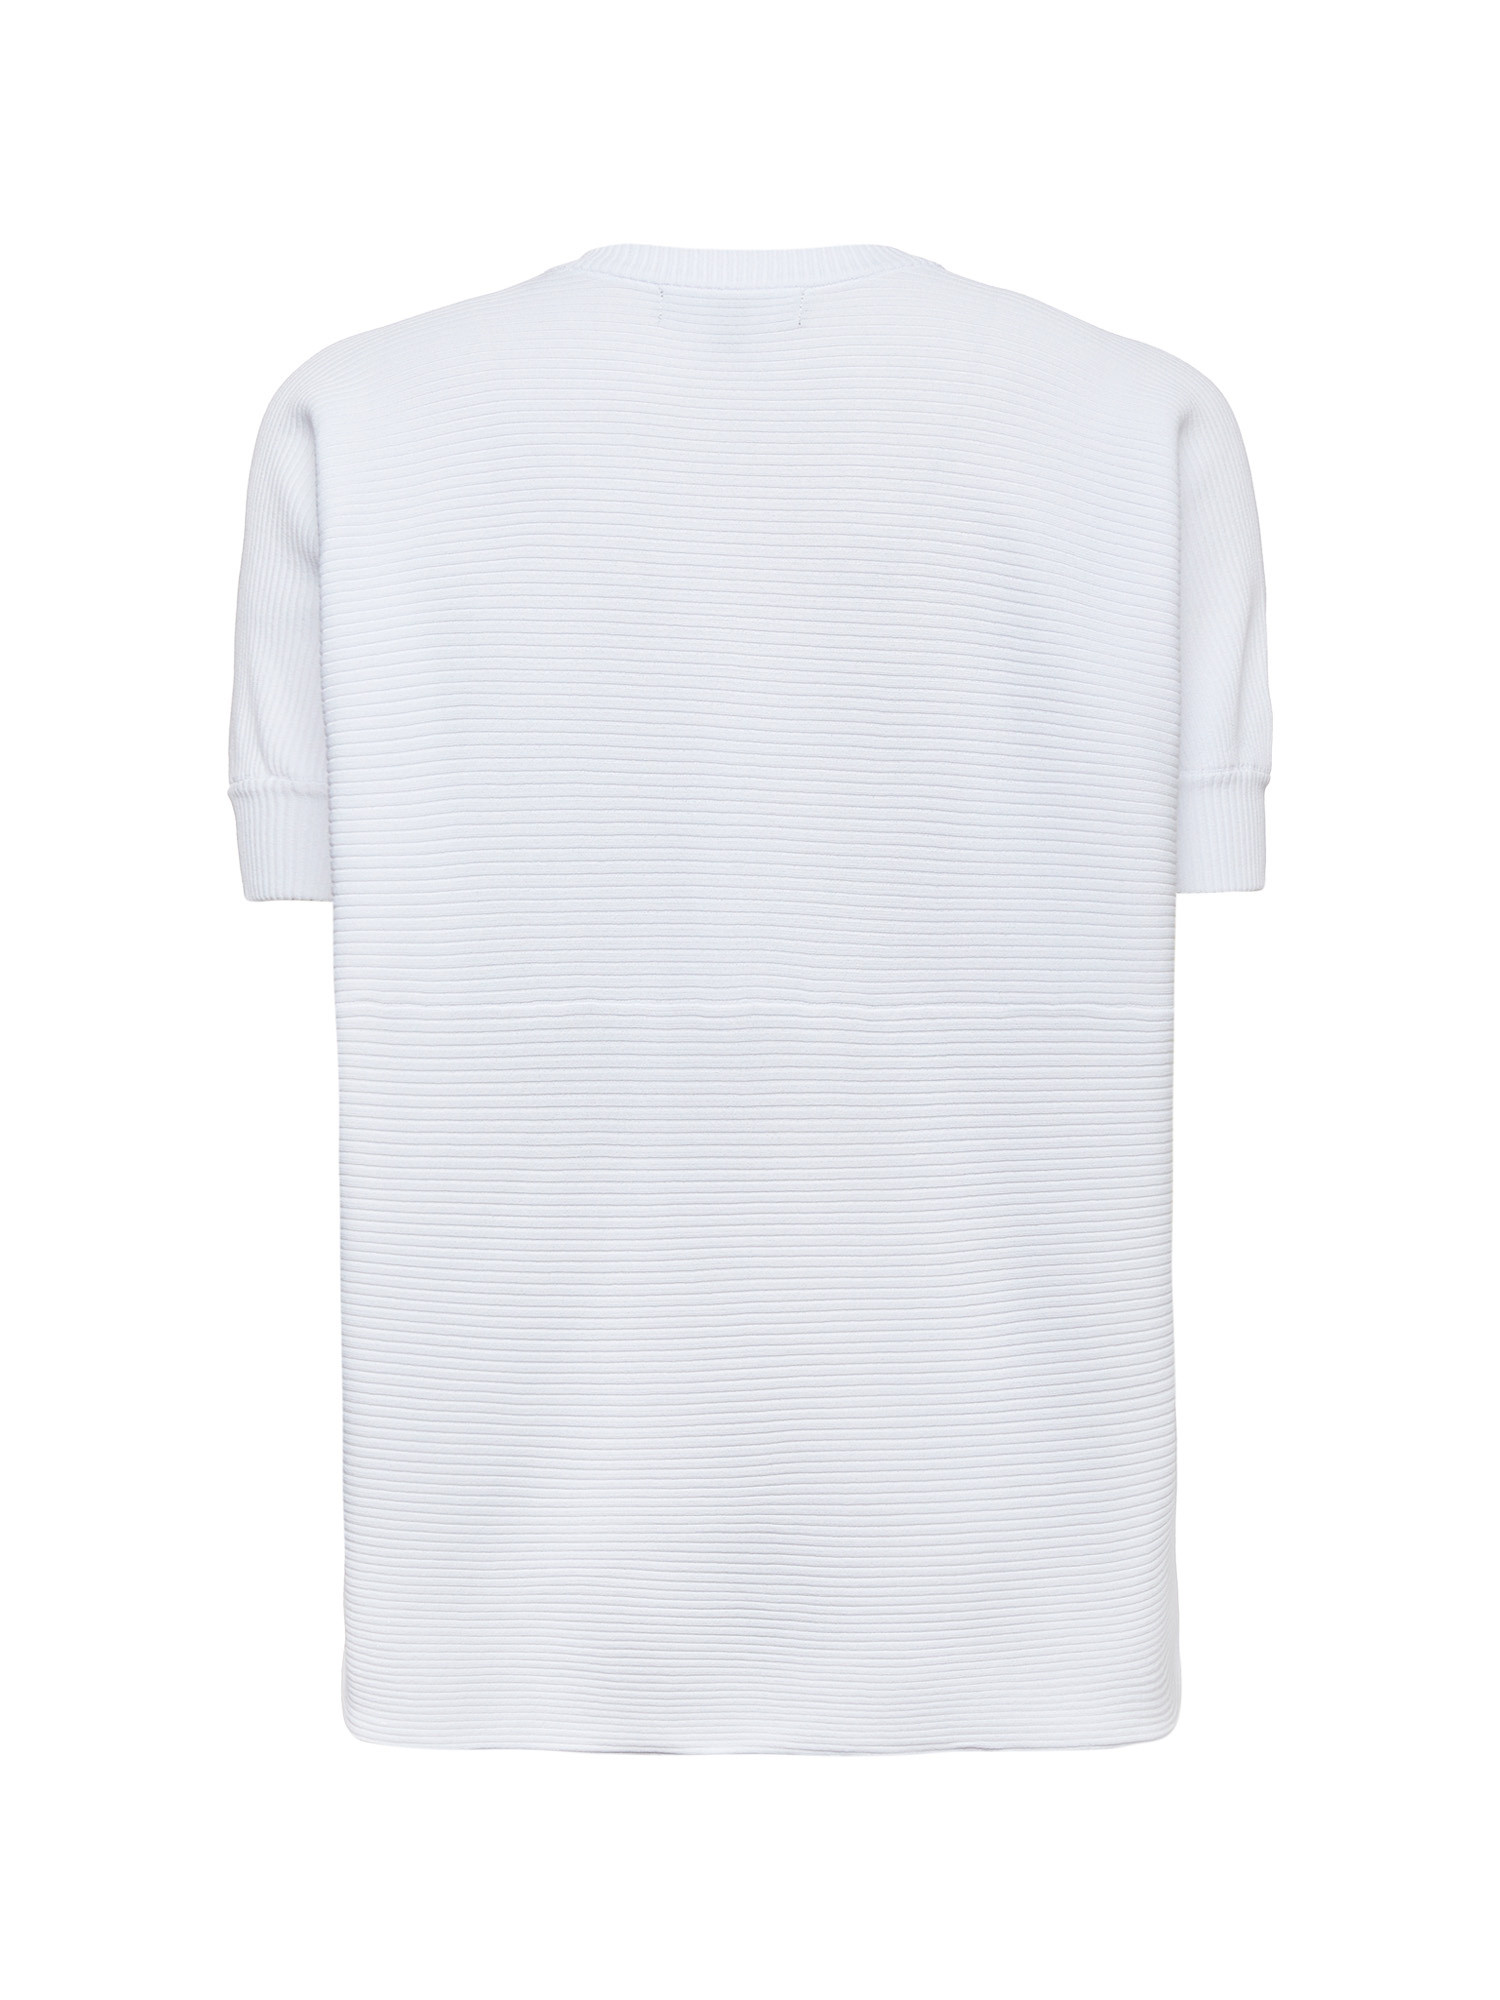 Armani Exchange - Maglione a costine con logo, Bianco, large image number 1